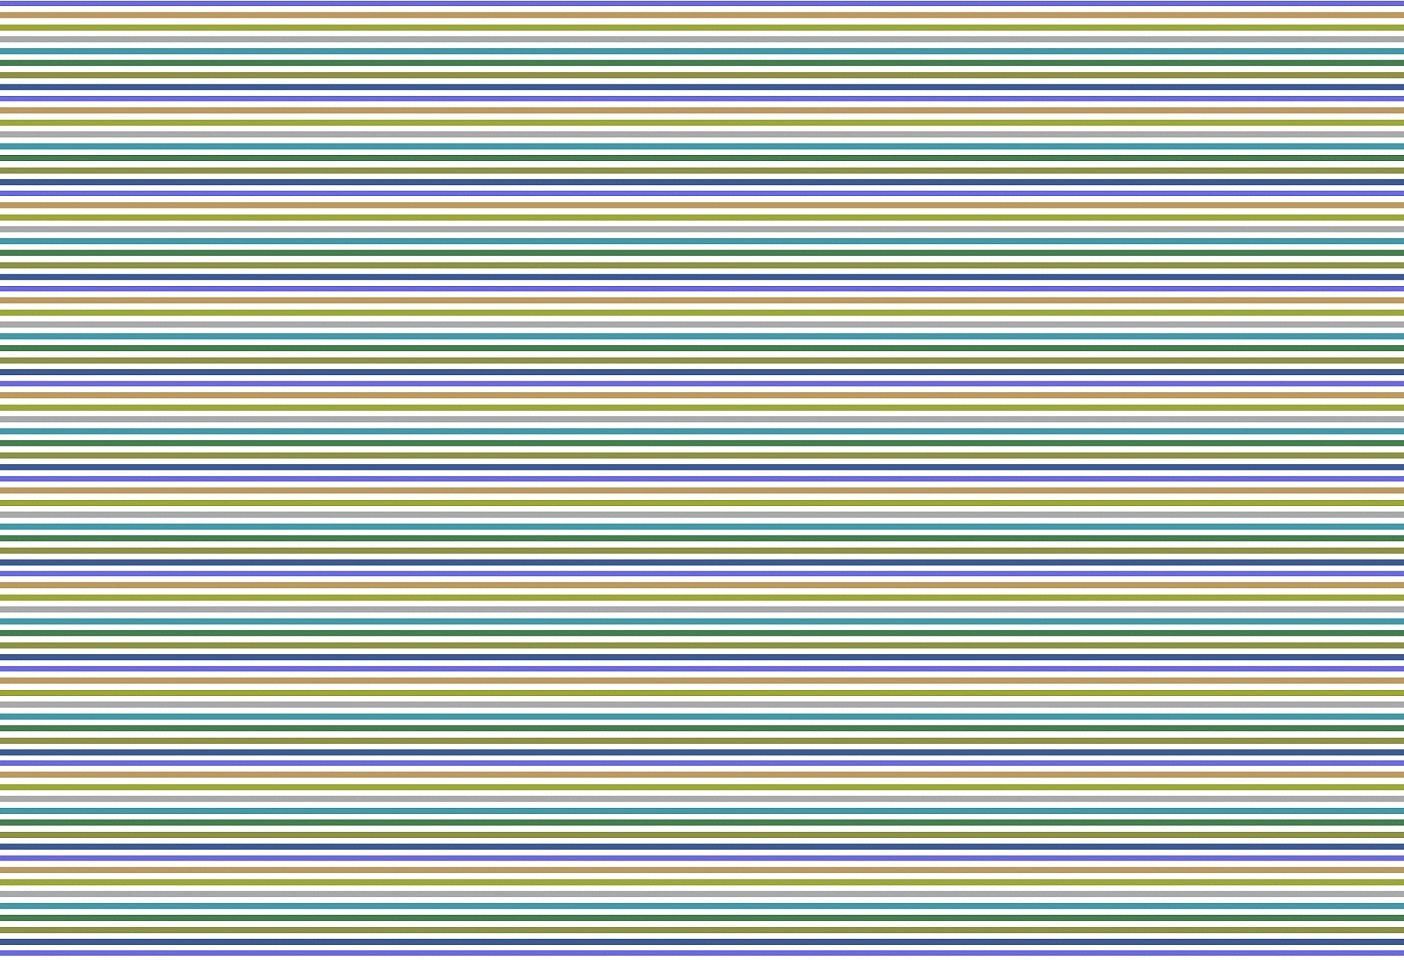 Dane Albert, Color Sticks #19, 2023
Acrylic on canvas (Concept), 48 x 72 in. (121.9 x 182.9 cm)
Series of colored lines and shapes in multiple configurations
DA.2023.sticks-019